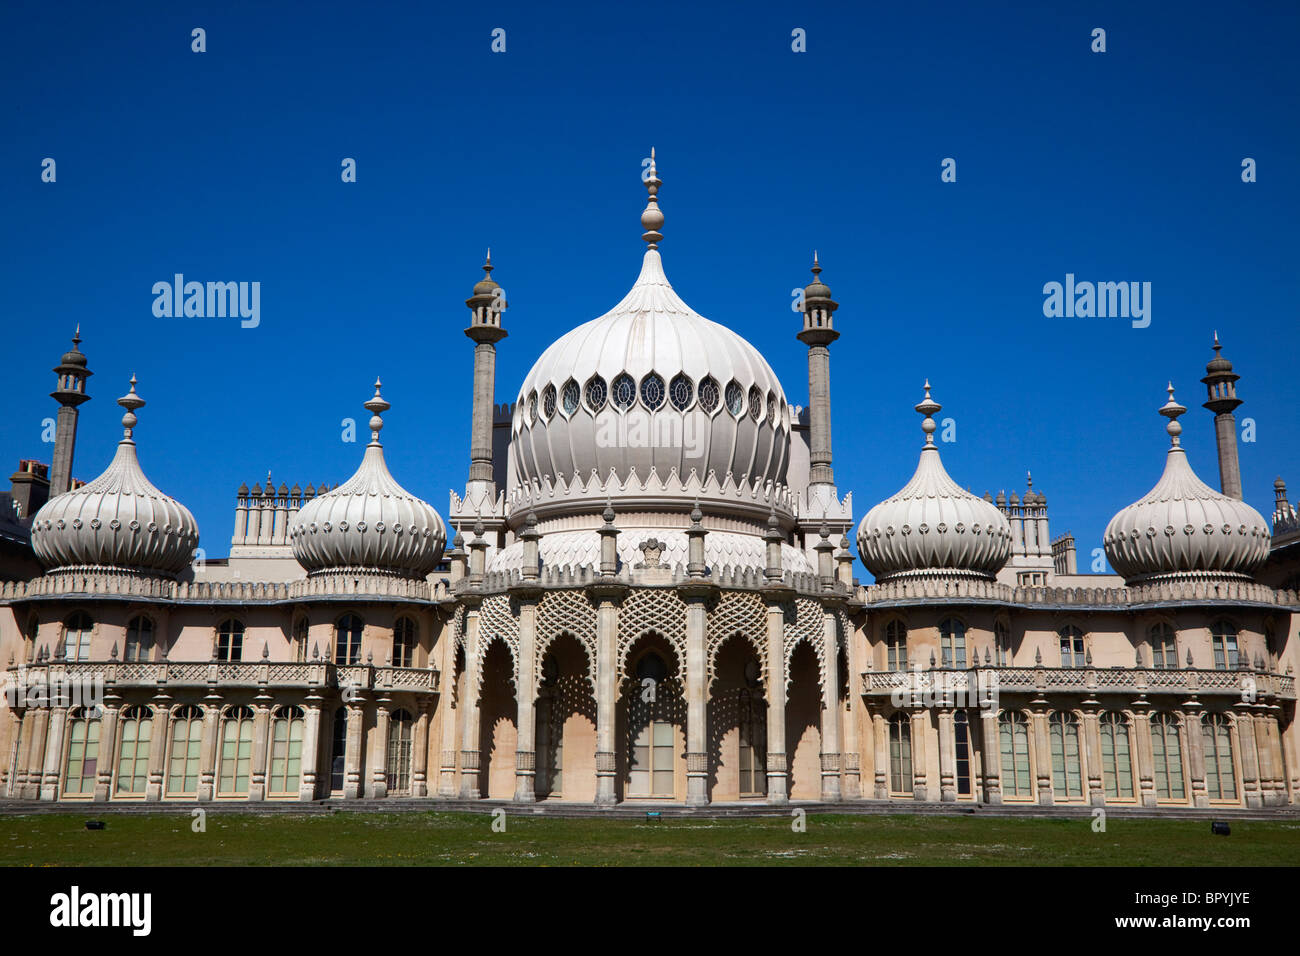 England, East Sussex, Brighton, The Royal Pavilion, 19th century retreat for the then Prince Regent, Designed by John Nash. Stock Photo